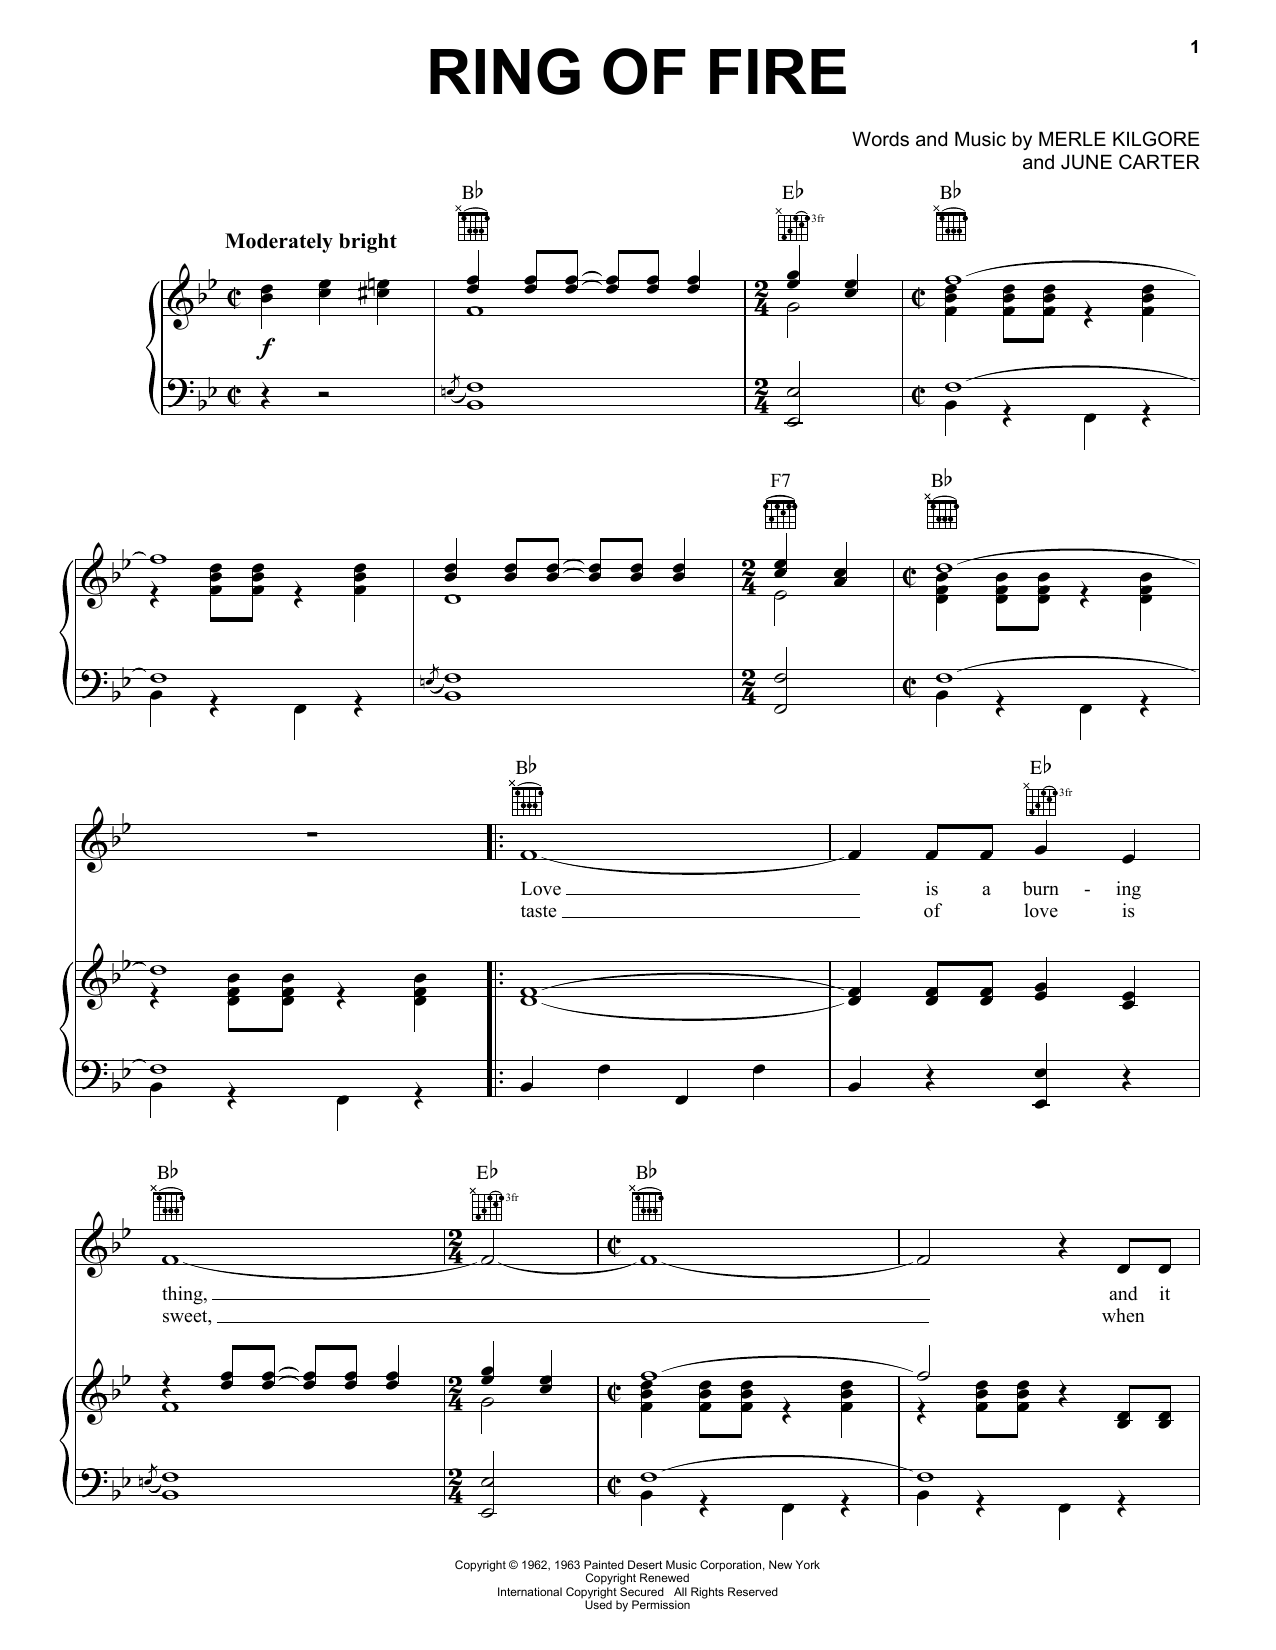 Johnny Cash Ring Of Fire sheet music notes and chords. Download Printable PDF.